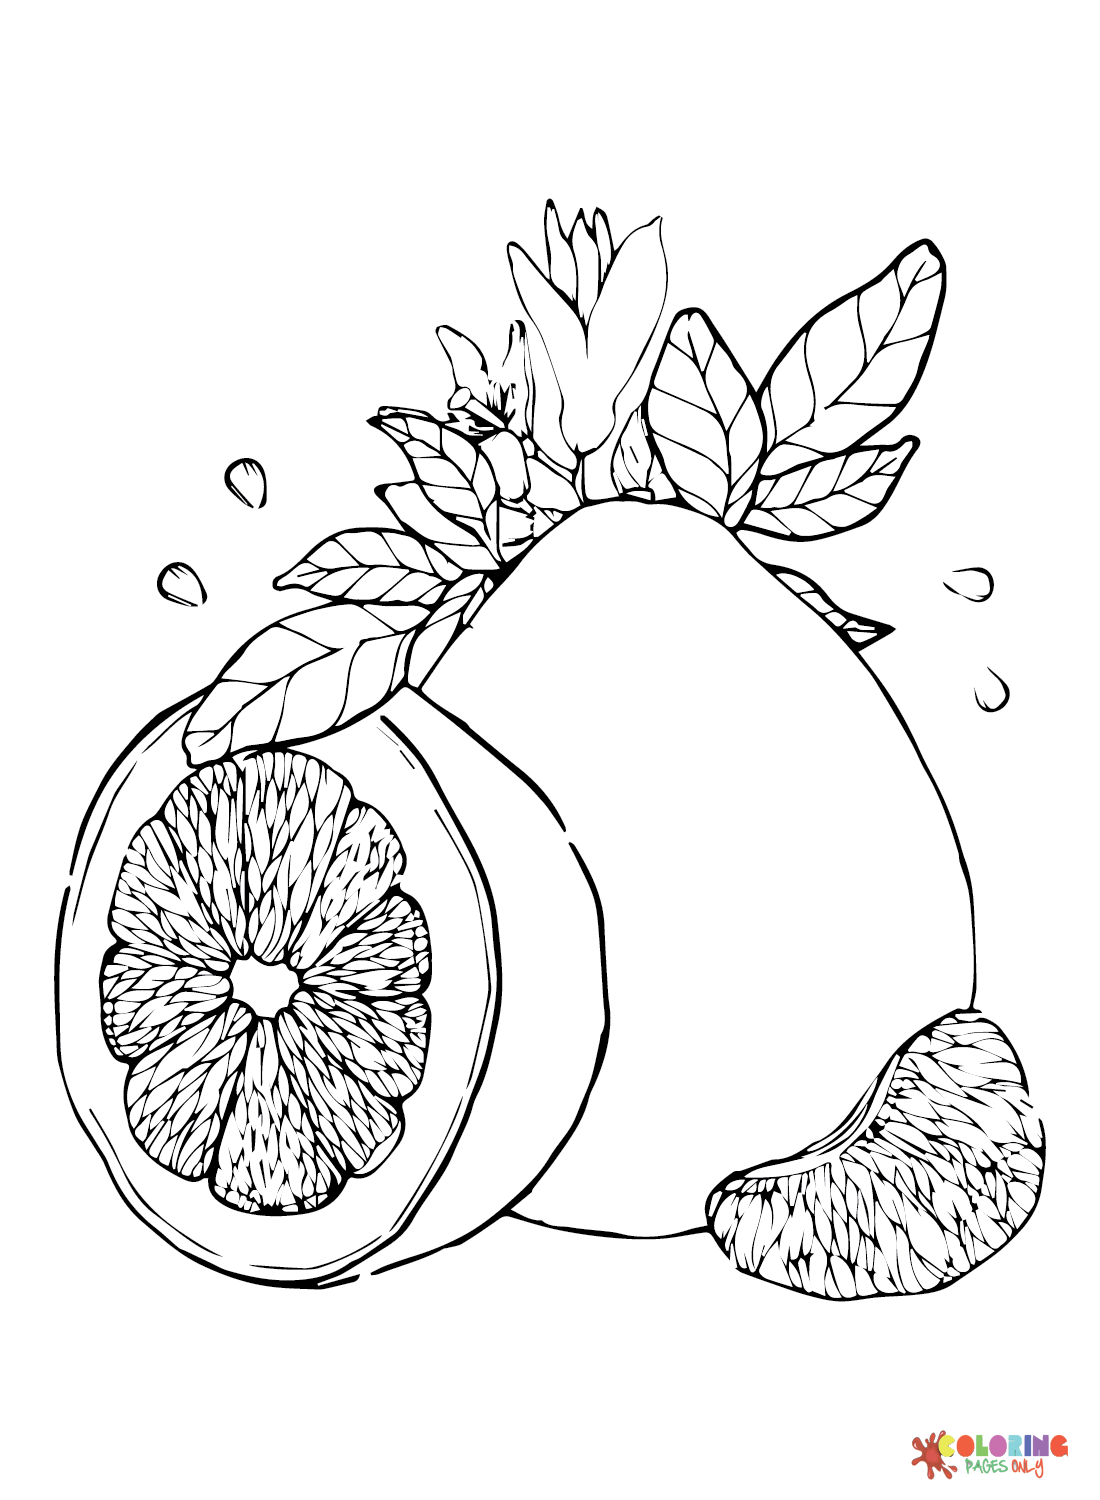 Citrus-fruits Printable Coloring Page